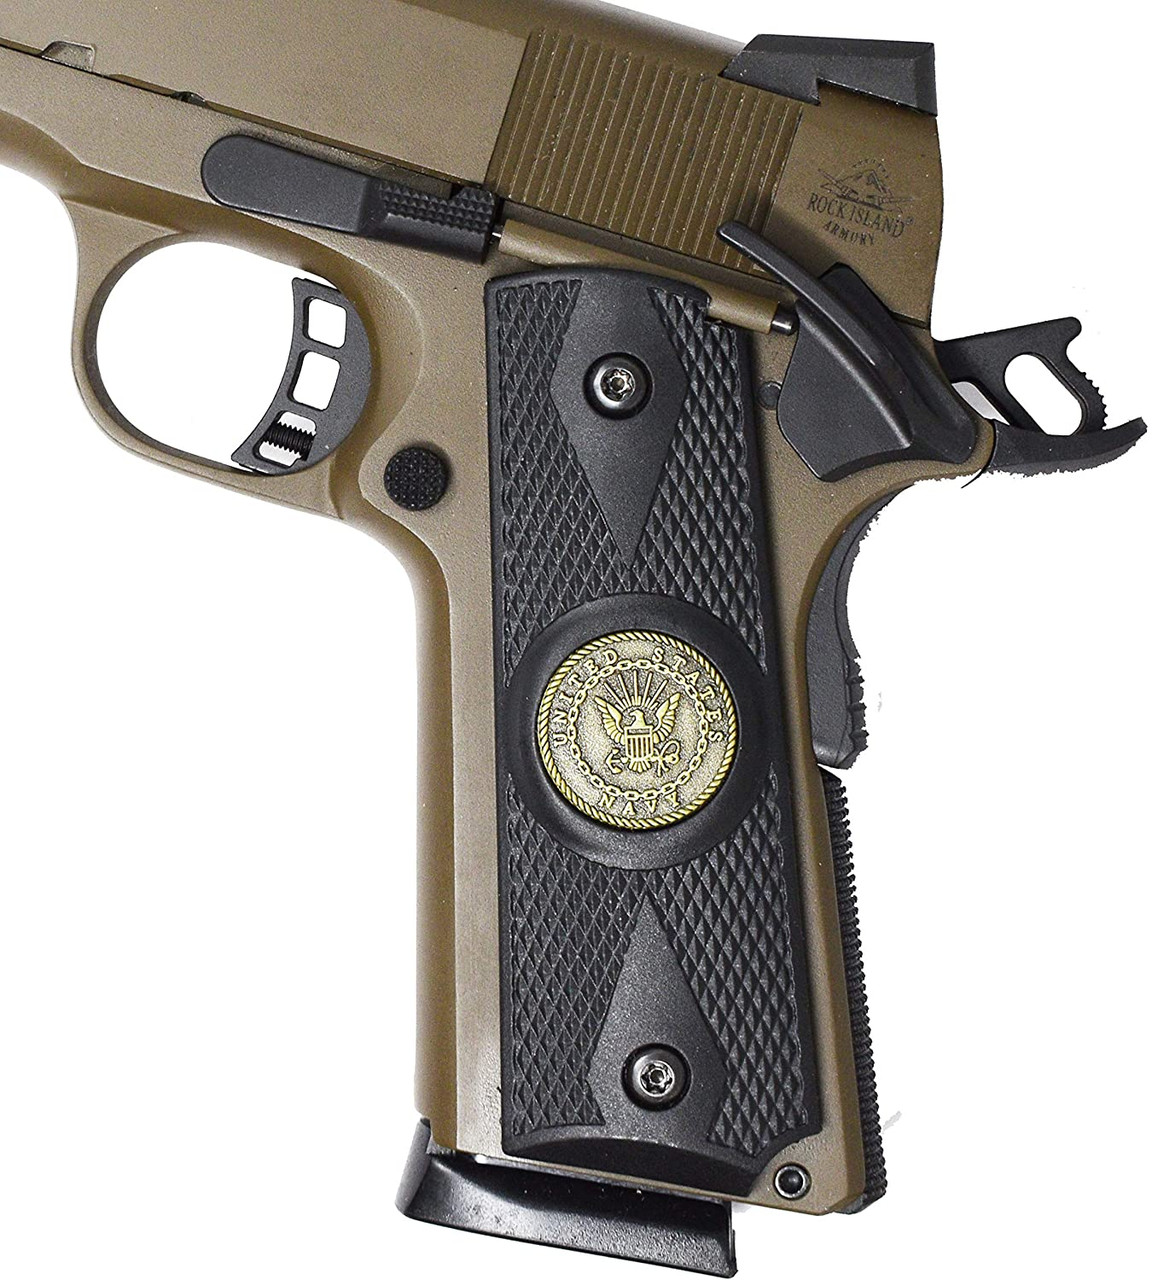  Garrison Grip 1911 Colt A1 Full Size and Clones (Grips Only) with US Navy Pewter Medallion Set in Double Diamond Ebony Black Colored ABS 